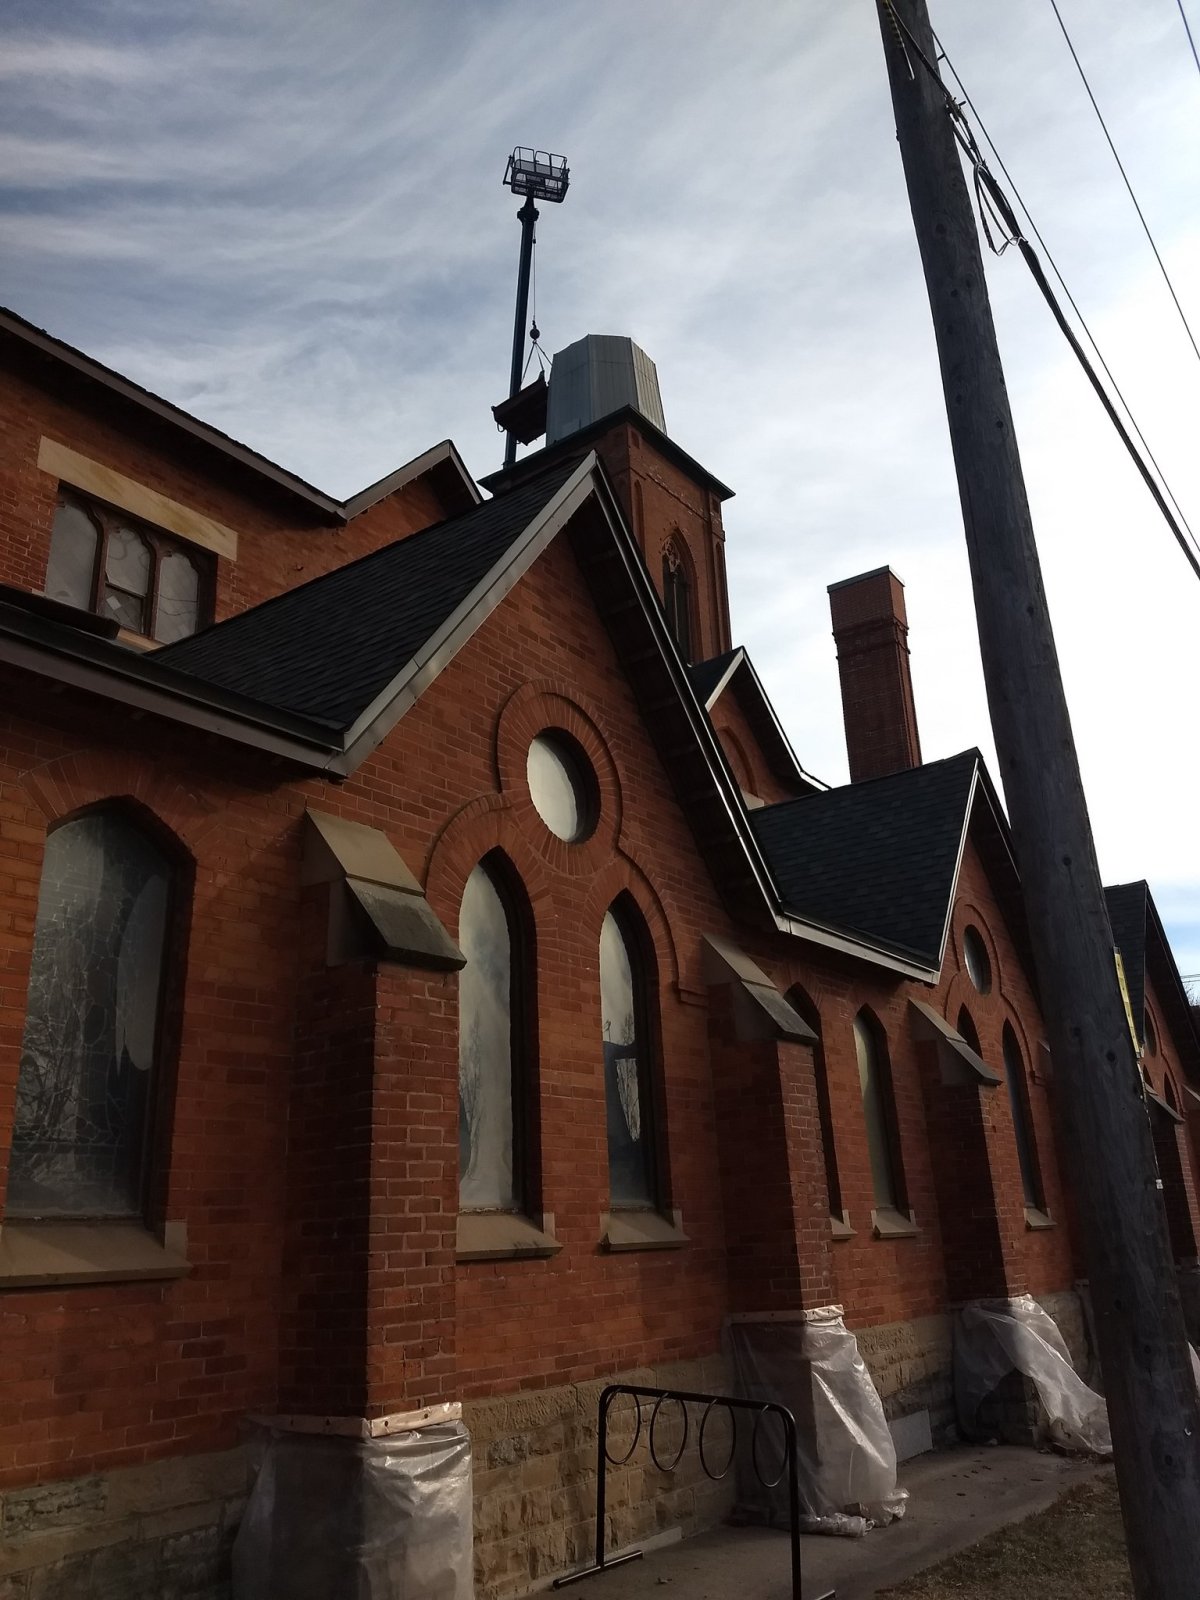 Demolition continues on St. Paul's Presbyterian Church in Peterborough. The congregation is relocating to The Mount Community Centre.